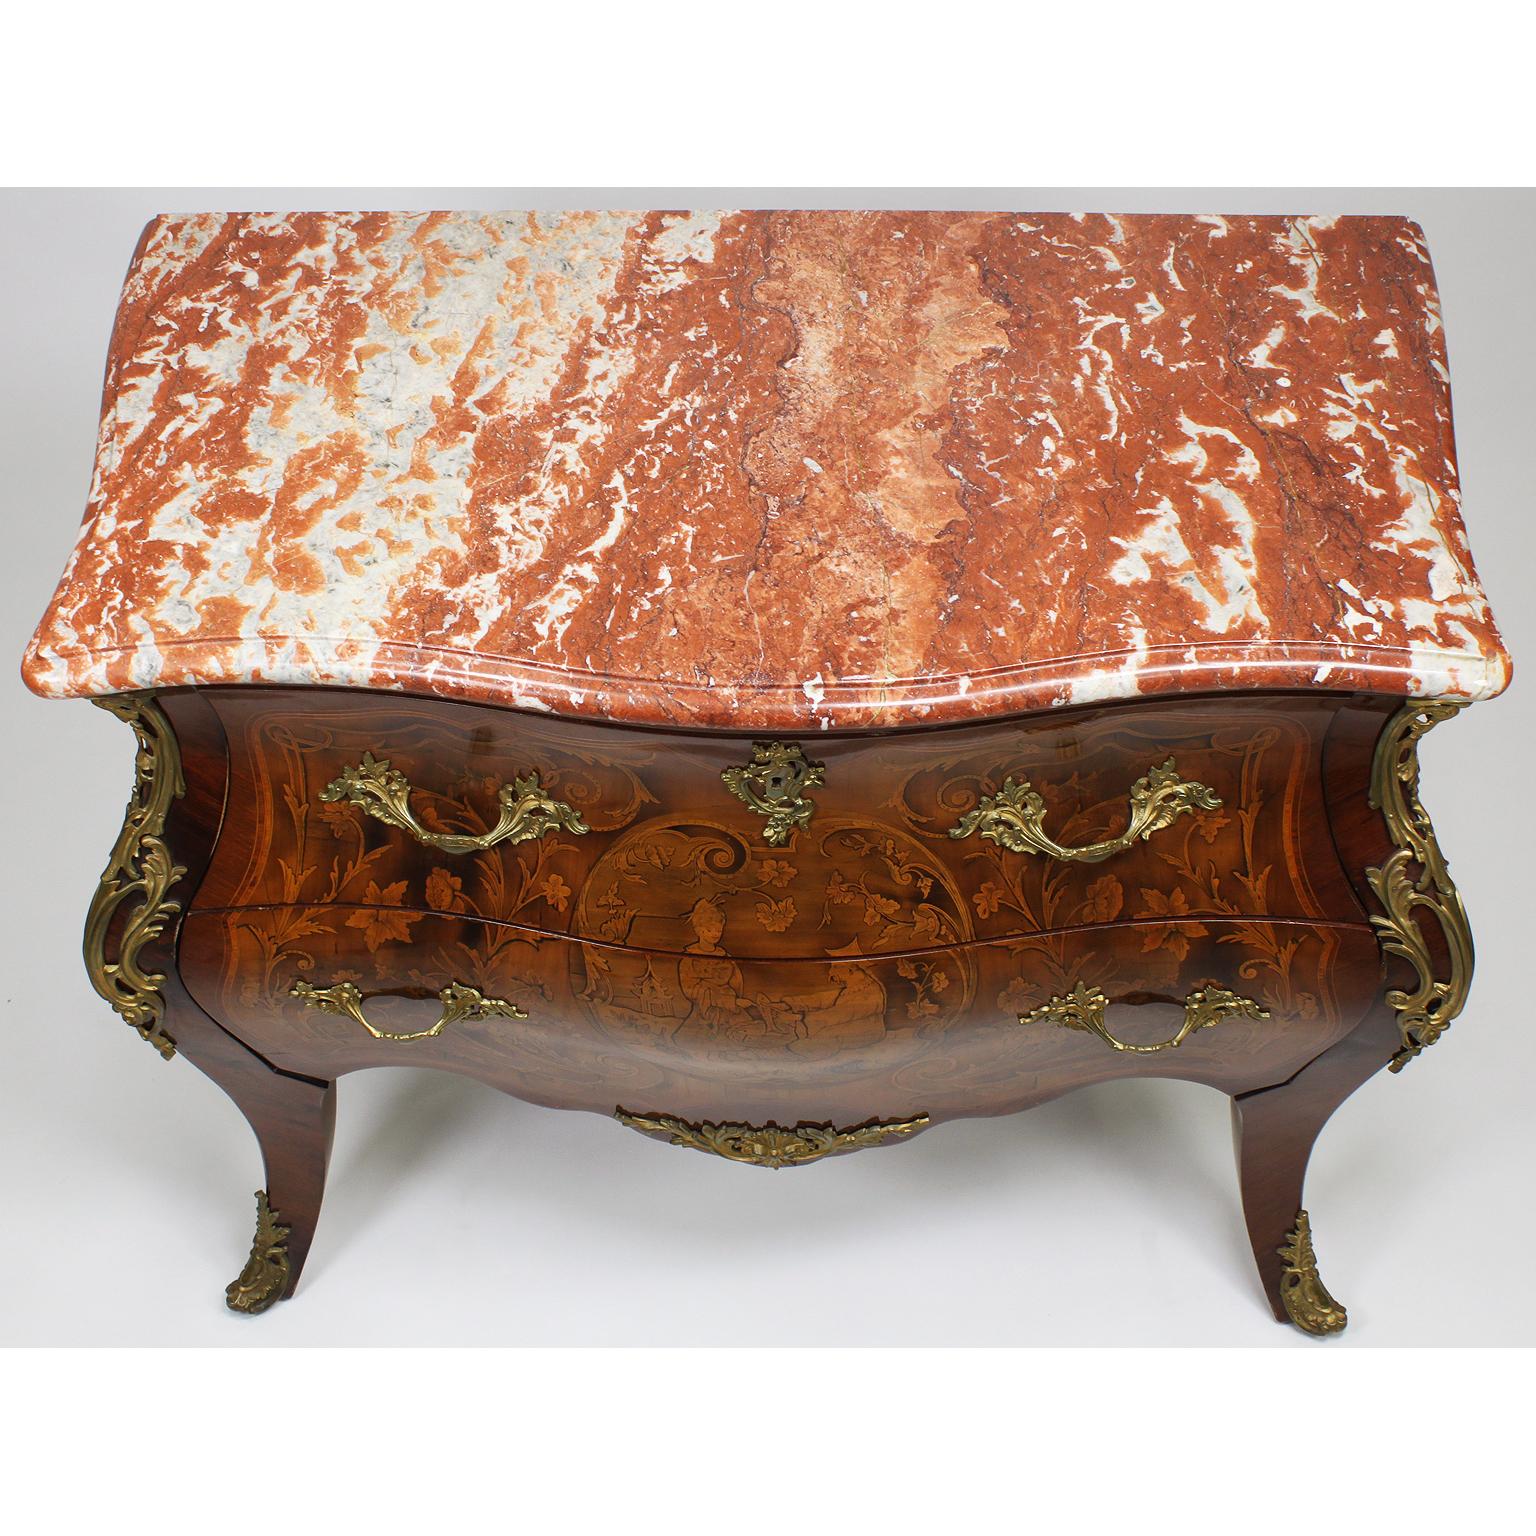 Fine French Louis XV Style Gilt-Bronze & Marquetry Chinoiserie Marquetry Commode For Sale 3